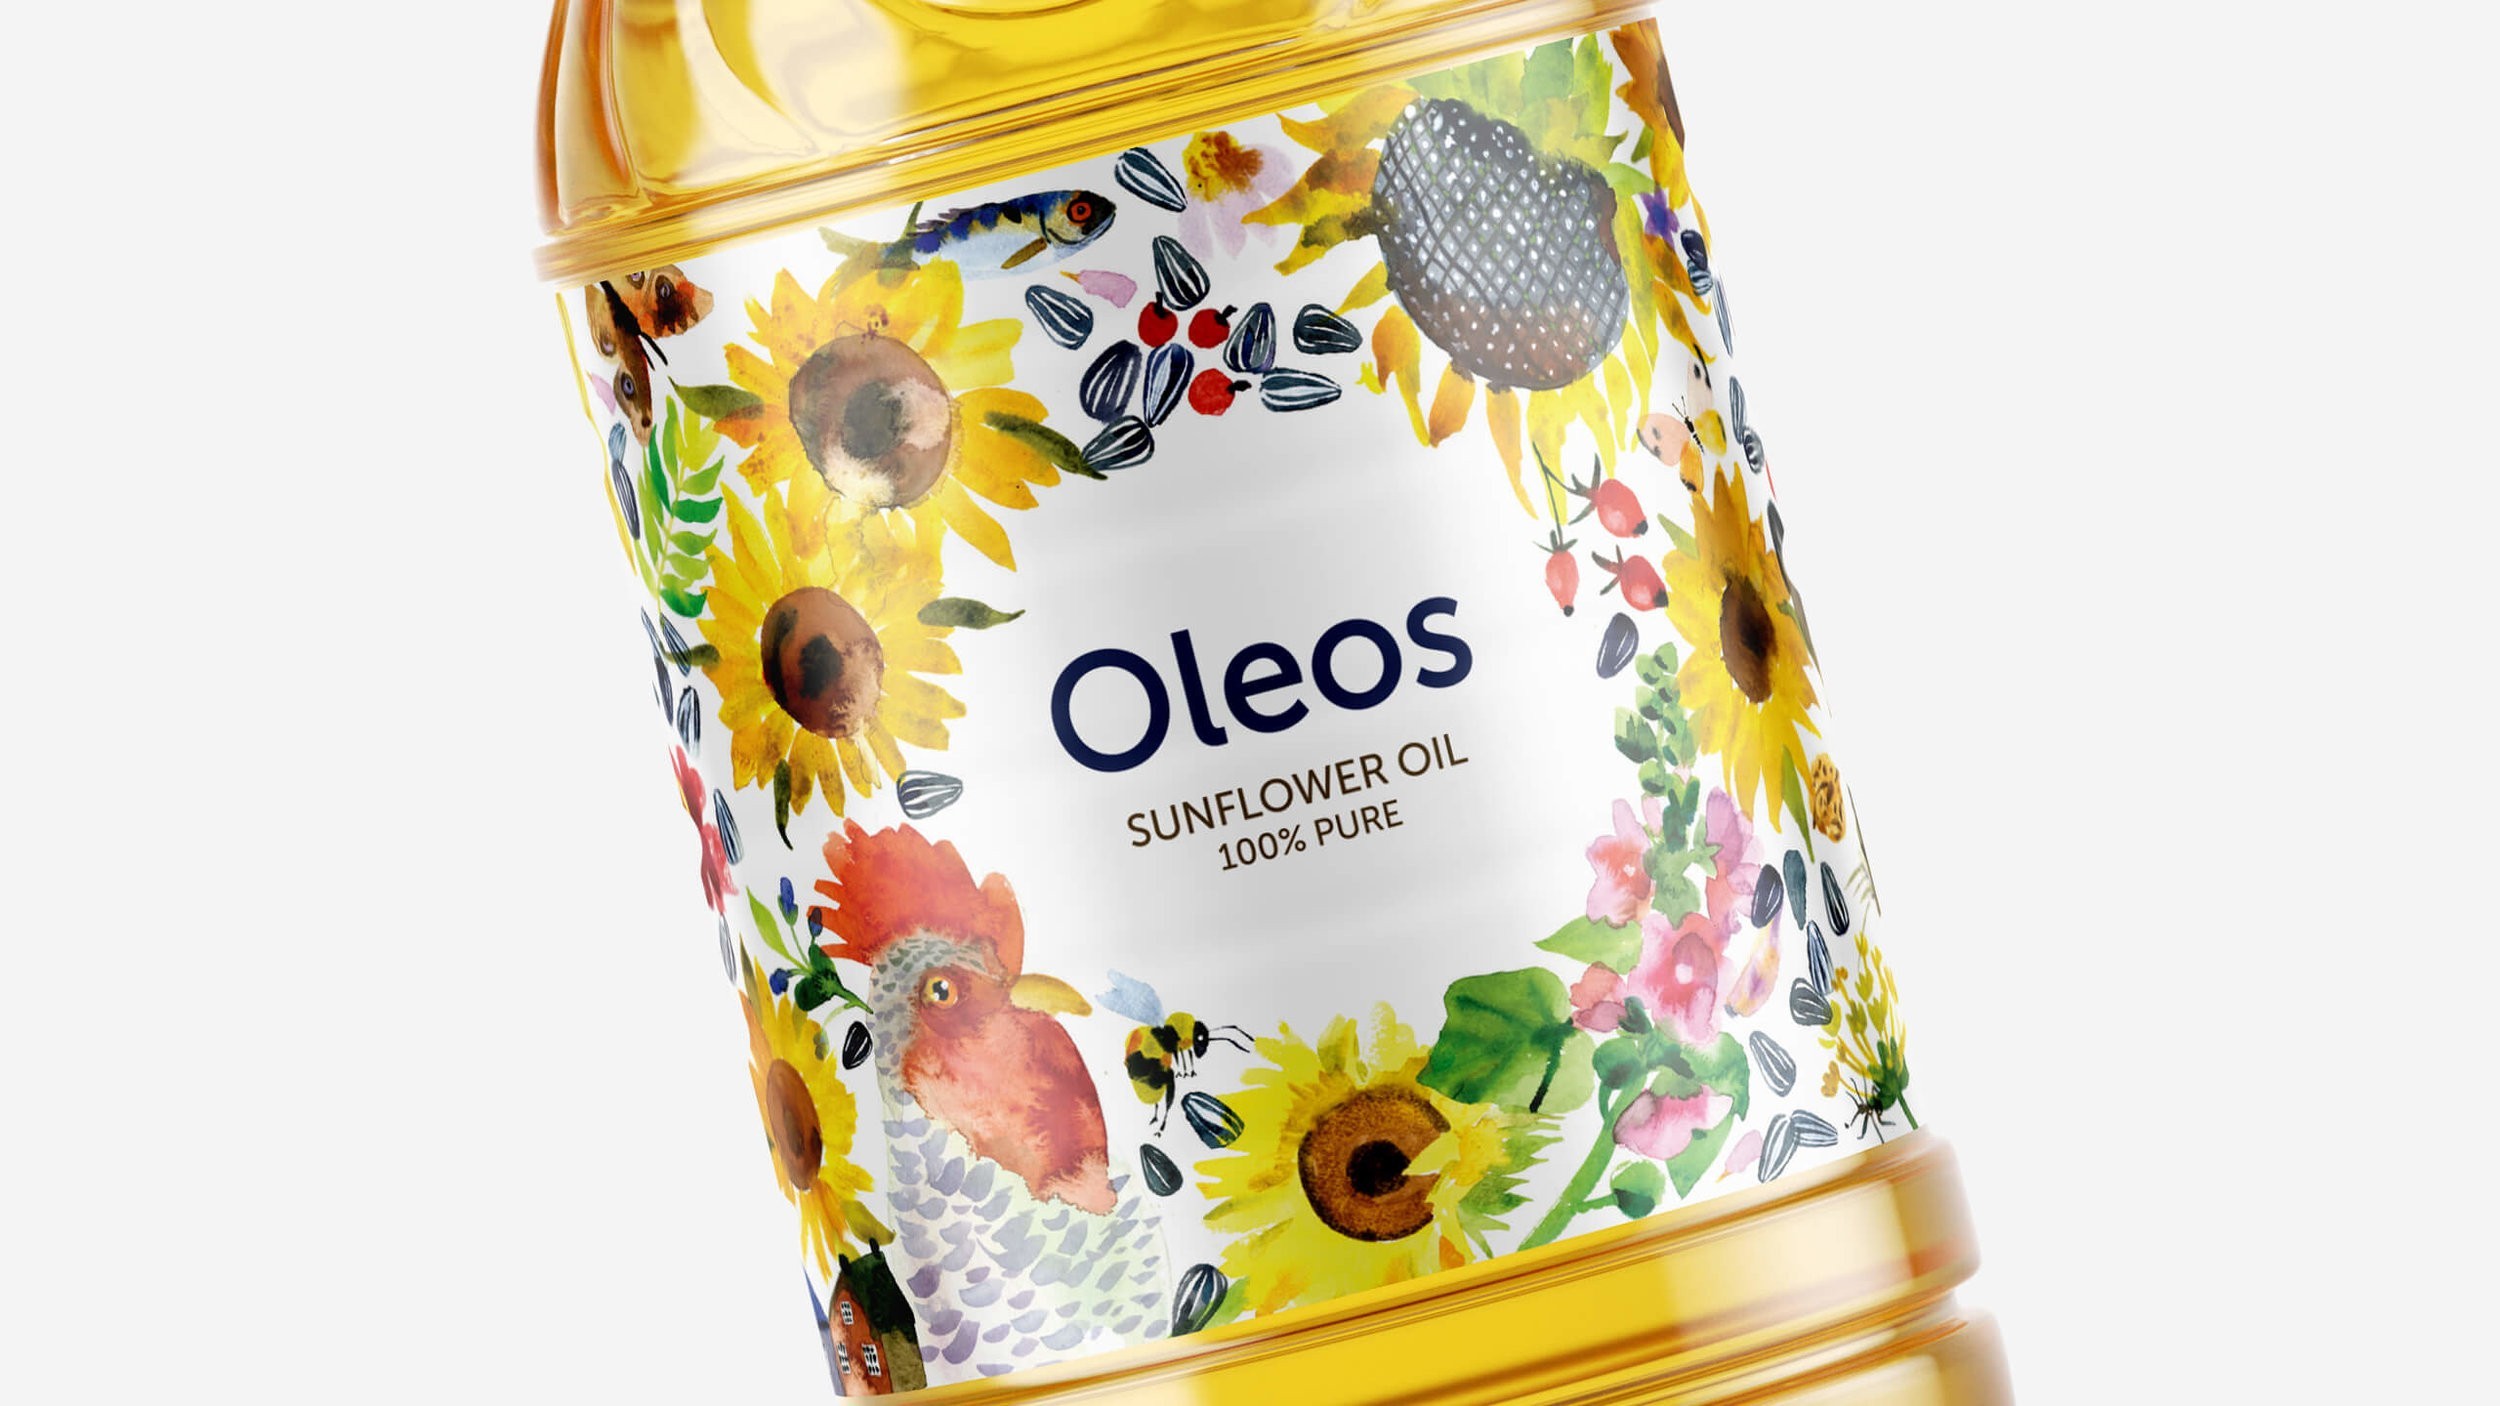 Sun Flower Oil Packaging with Emotional and Vivid Watercolour Illustration